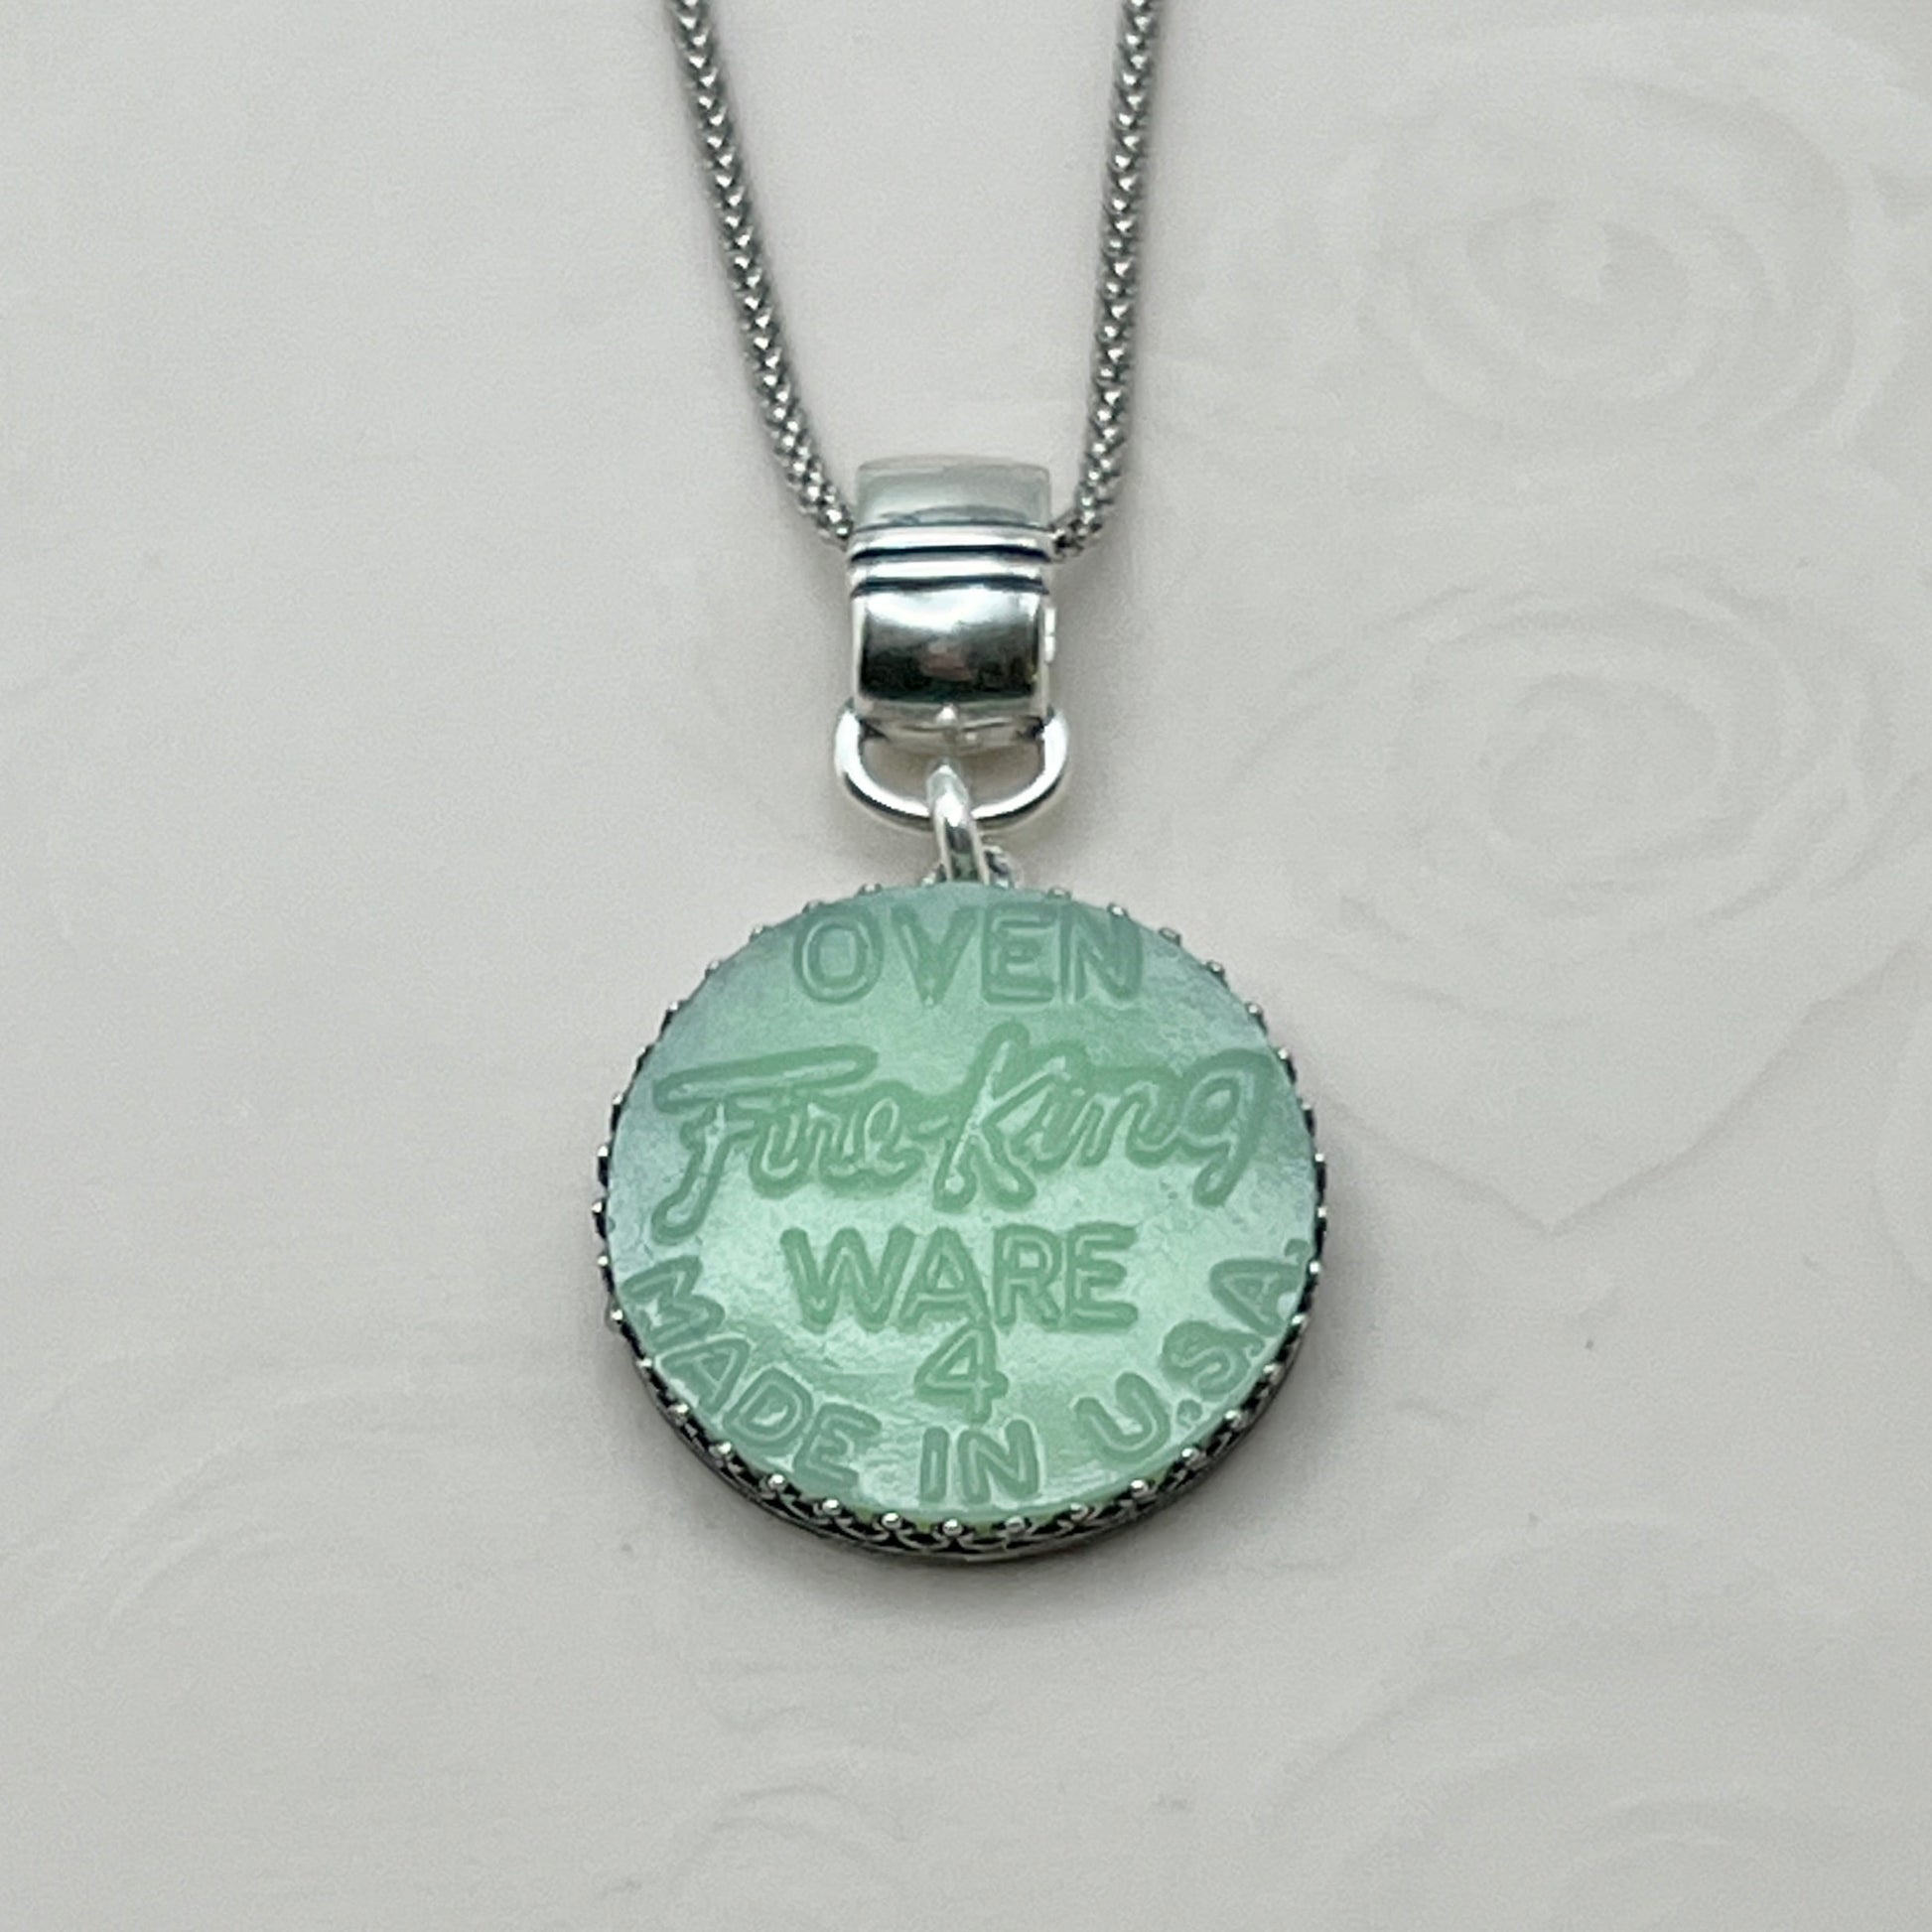 Jadeite Fire King Jewelry, Jadeite Junkies, Broken China Jewelry, Gifts for Mom, Vintage Sterling Silver Necklace, Unique Gifts for Women